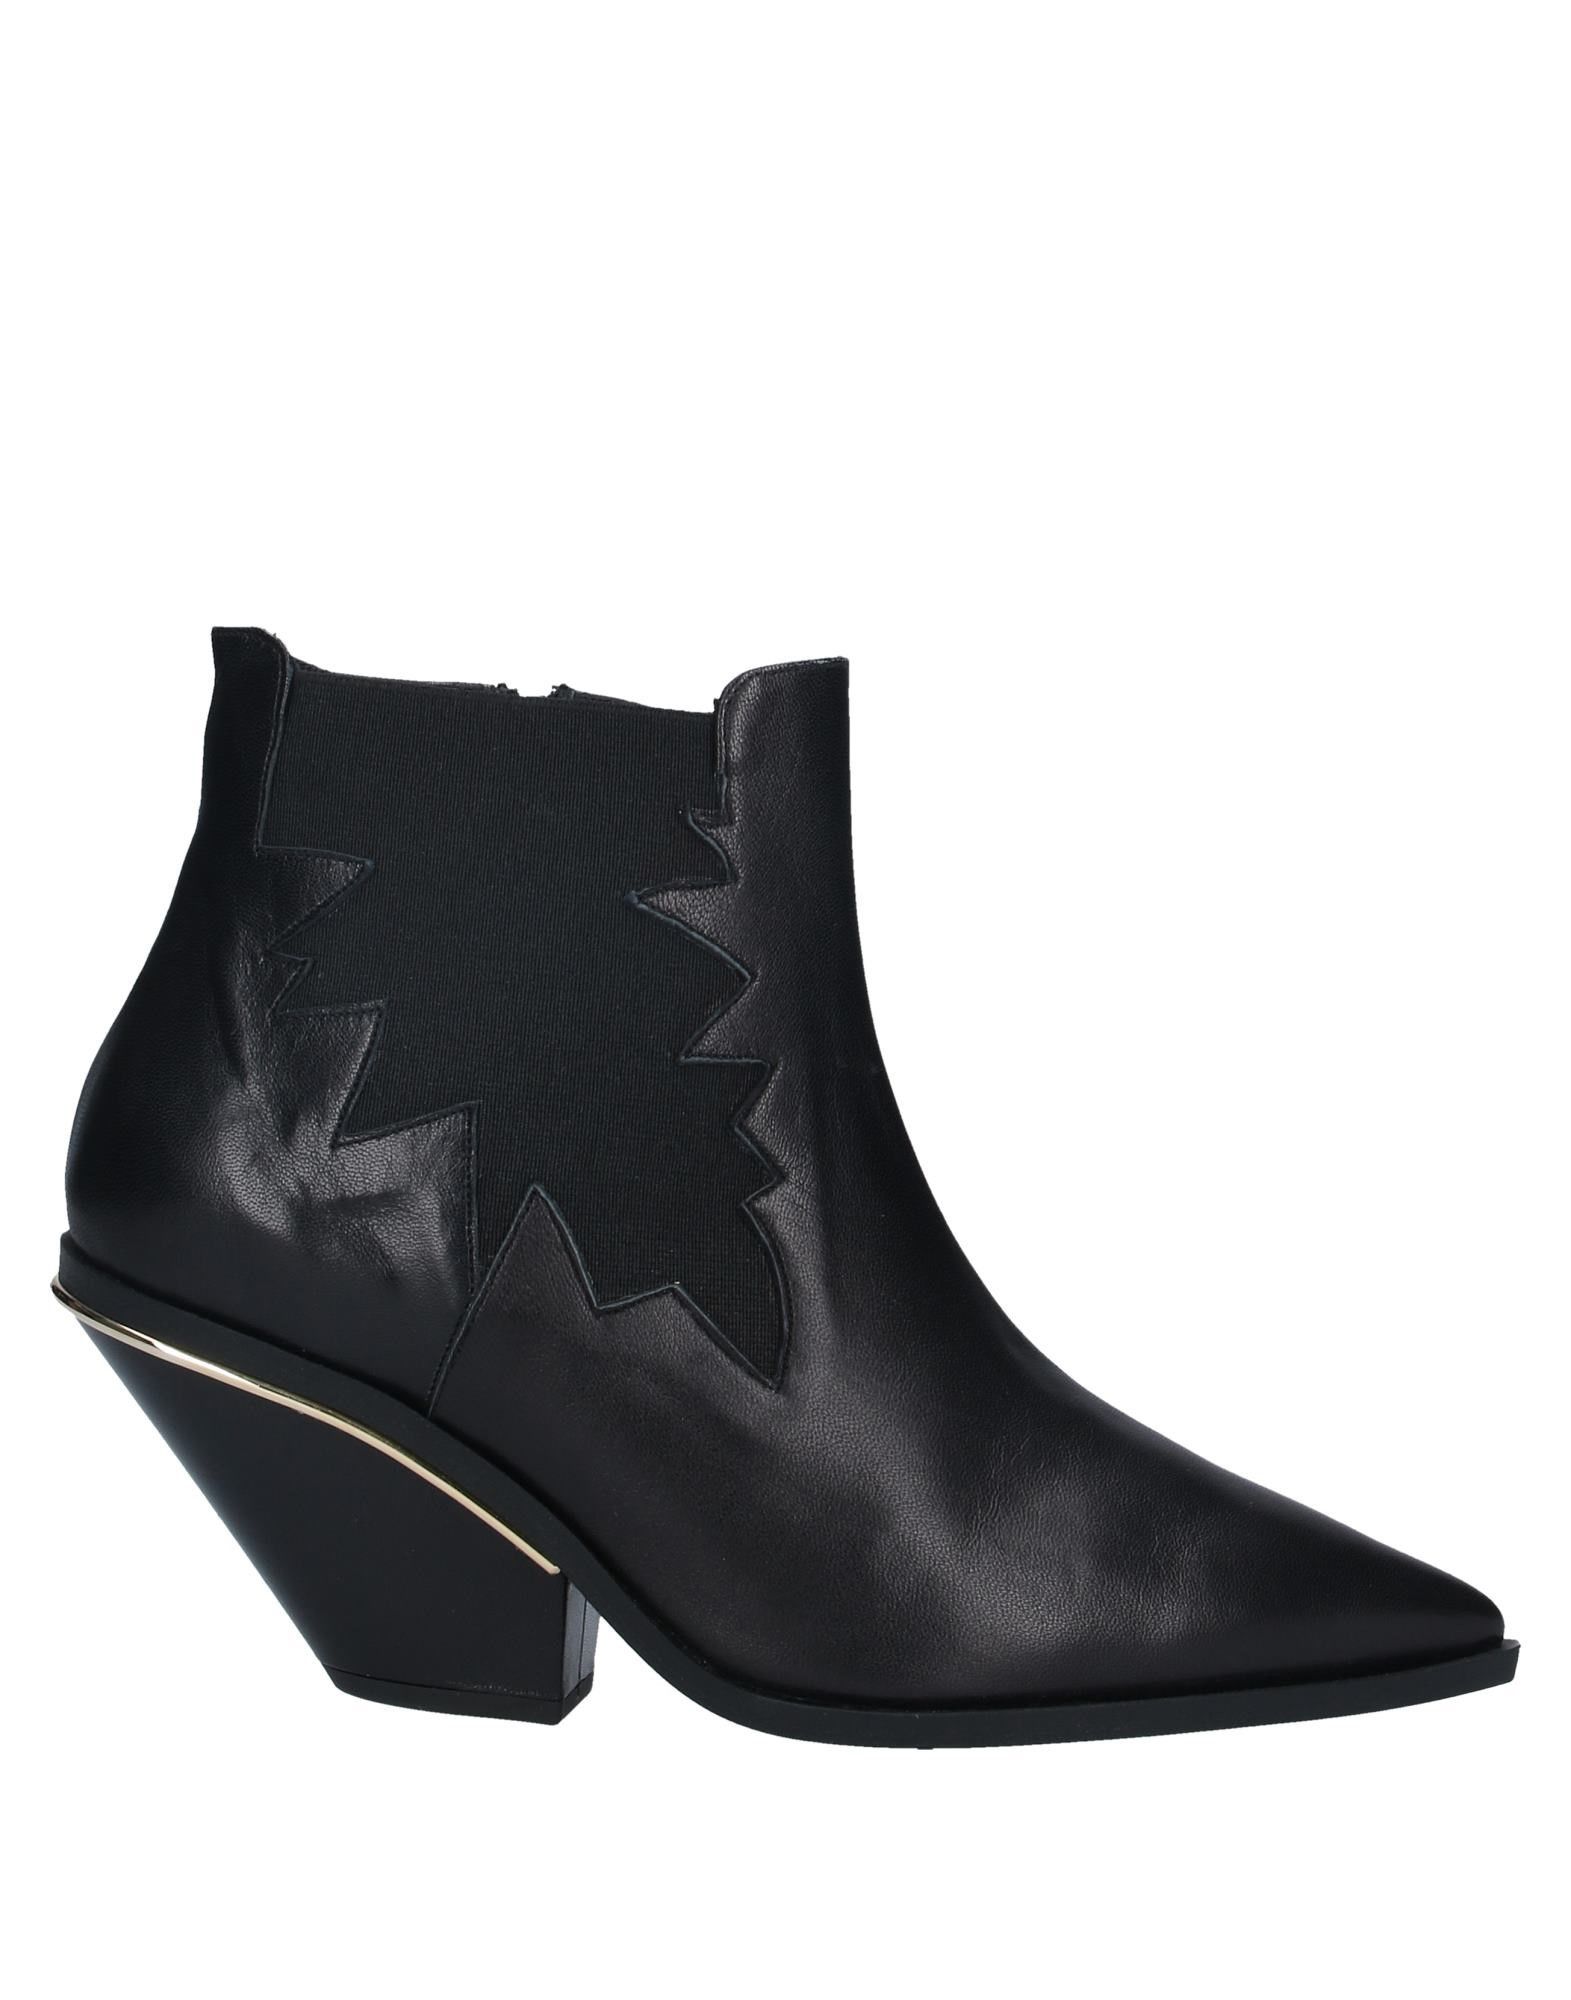 ISLO ISABELLA LORUSSO Ankle boots - Item 11903077